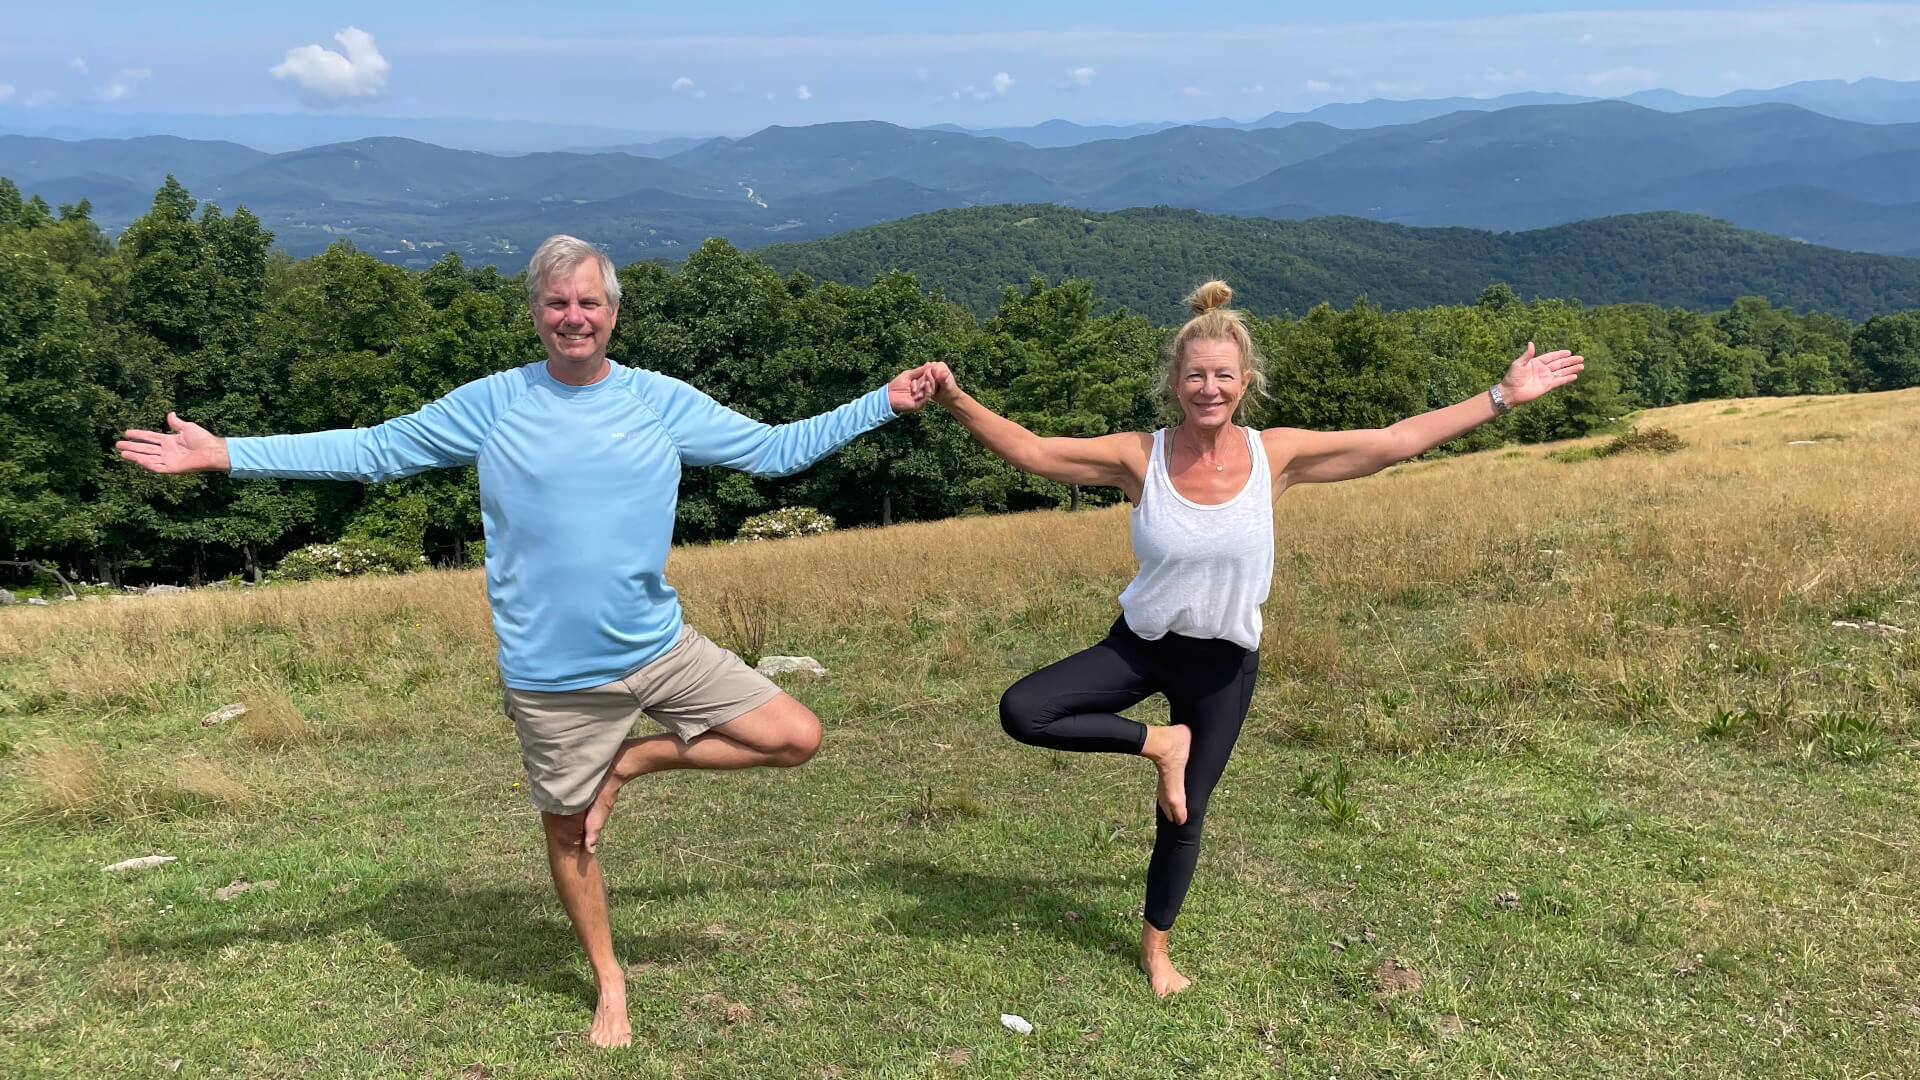 Couple doing yoga together during Couples Retreat yoga session on an Asheville mountain.